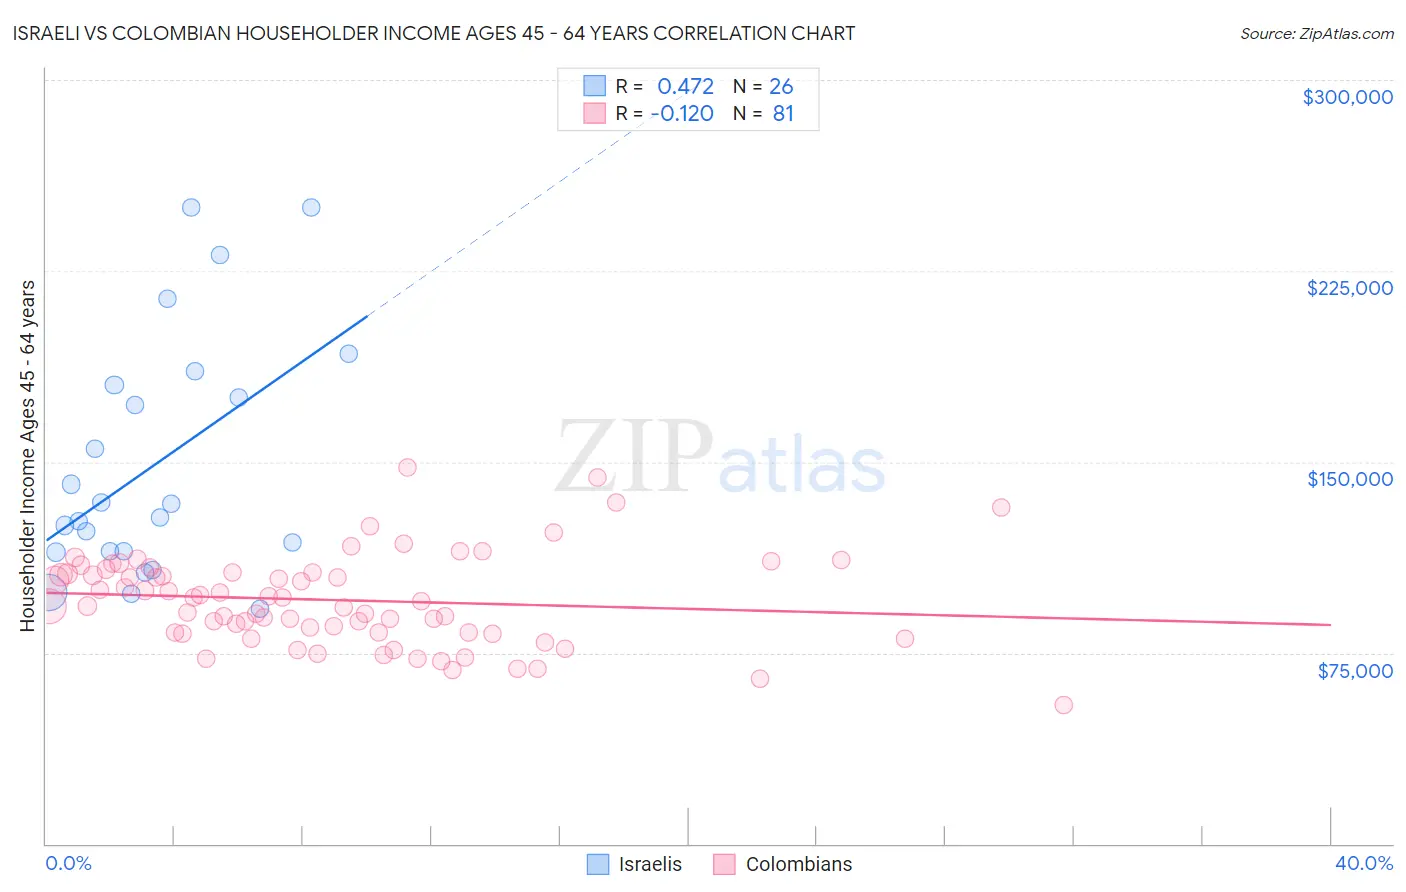 Israeli vs Colombian Householder Income Ages 45 - 64 years